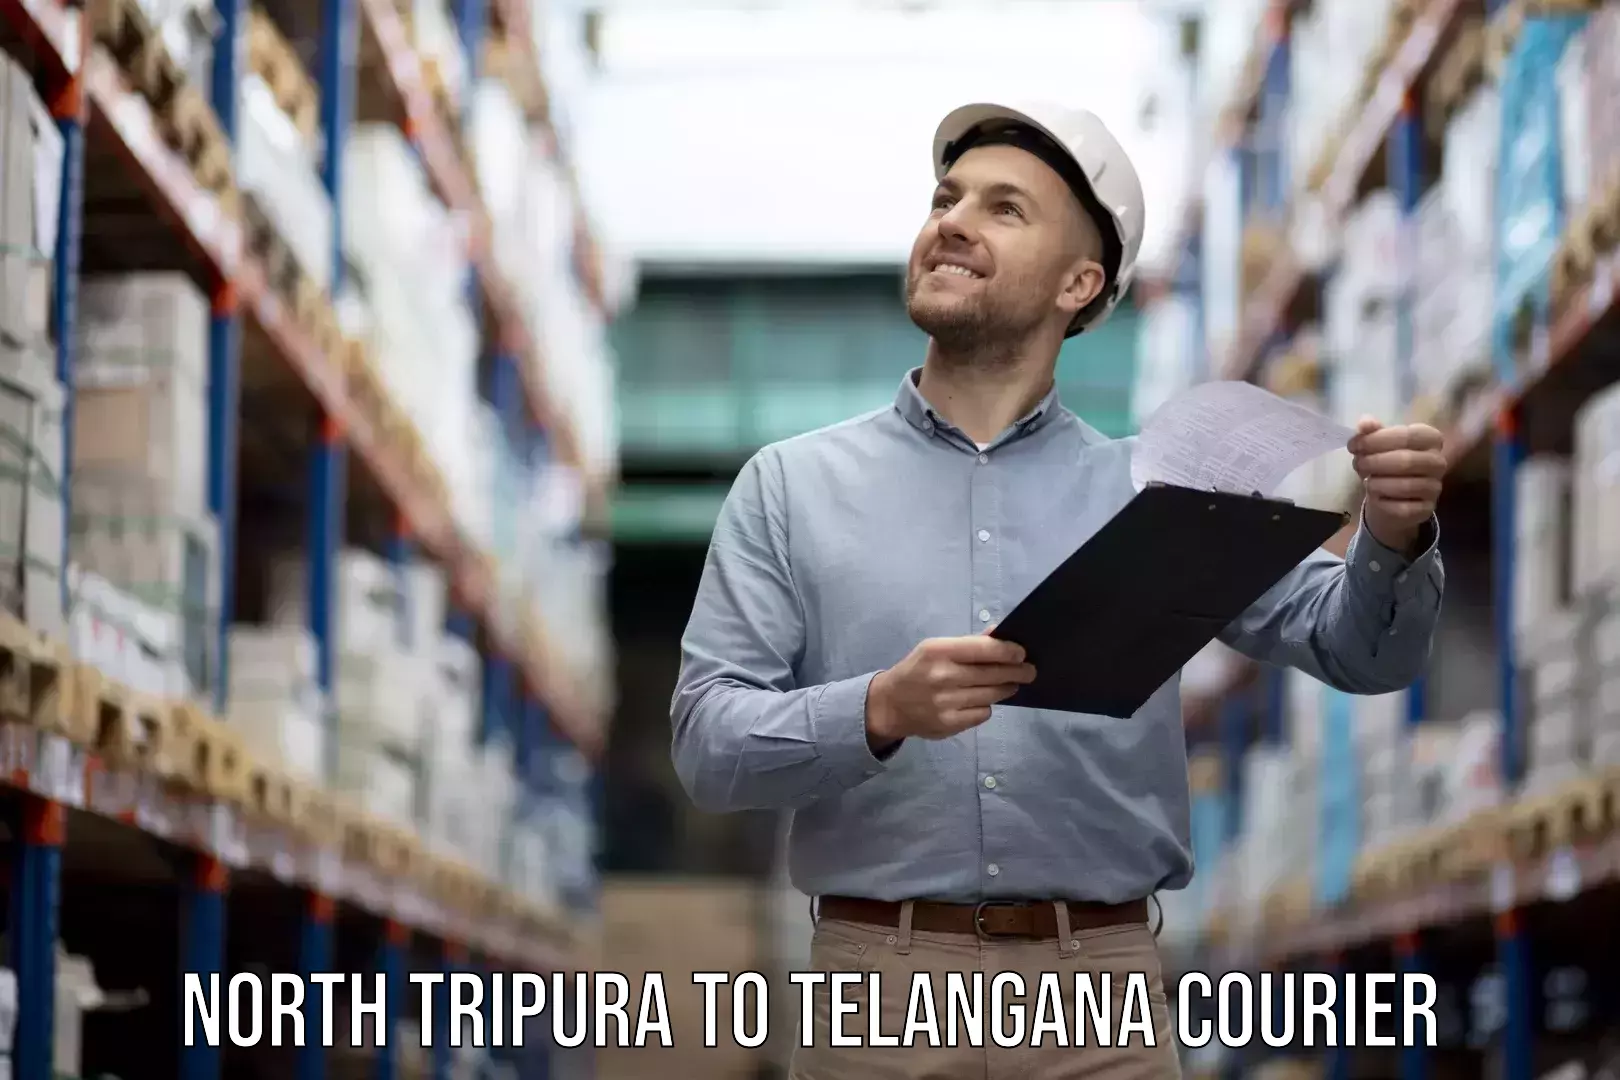 Household logistics services North Tripura to Secunderabad